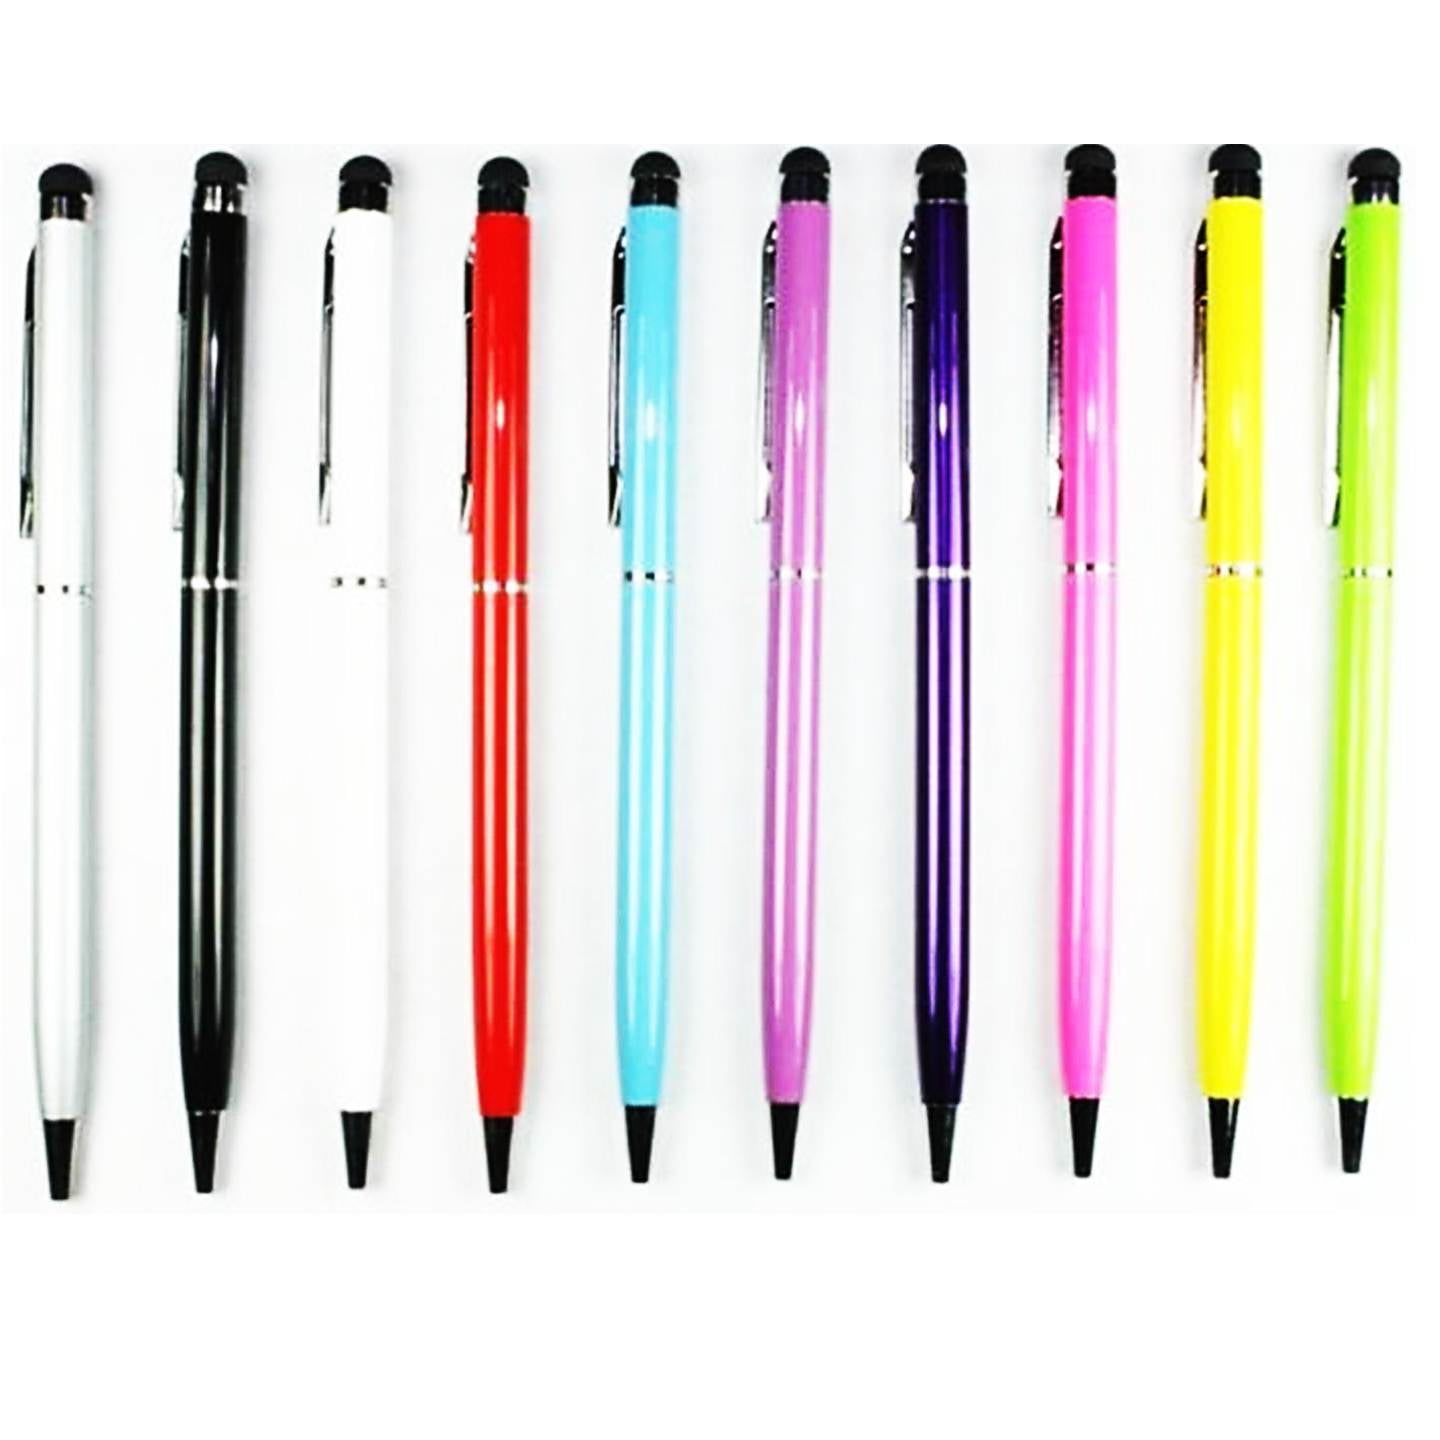 2-in-1 Stylus Touch Screen Ballpoint Pen for iPad iPhone iPod Tablet L2N9 